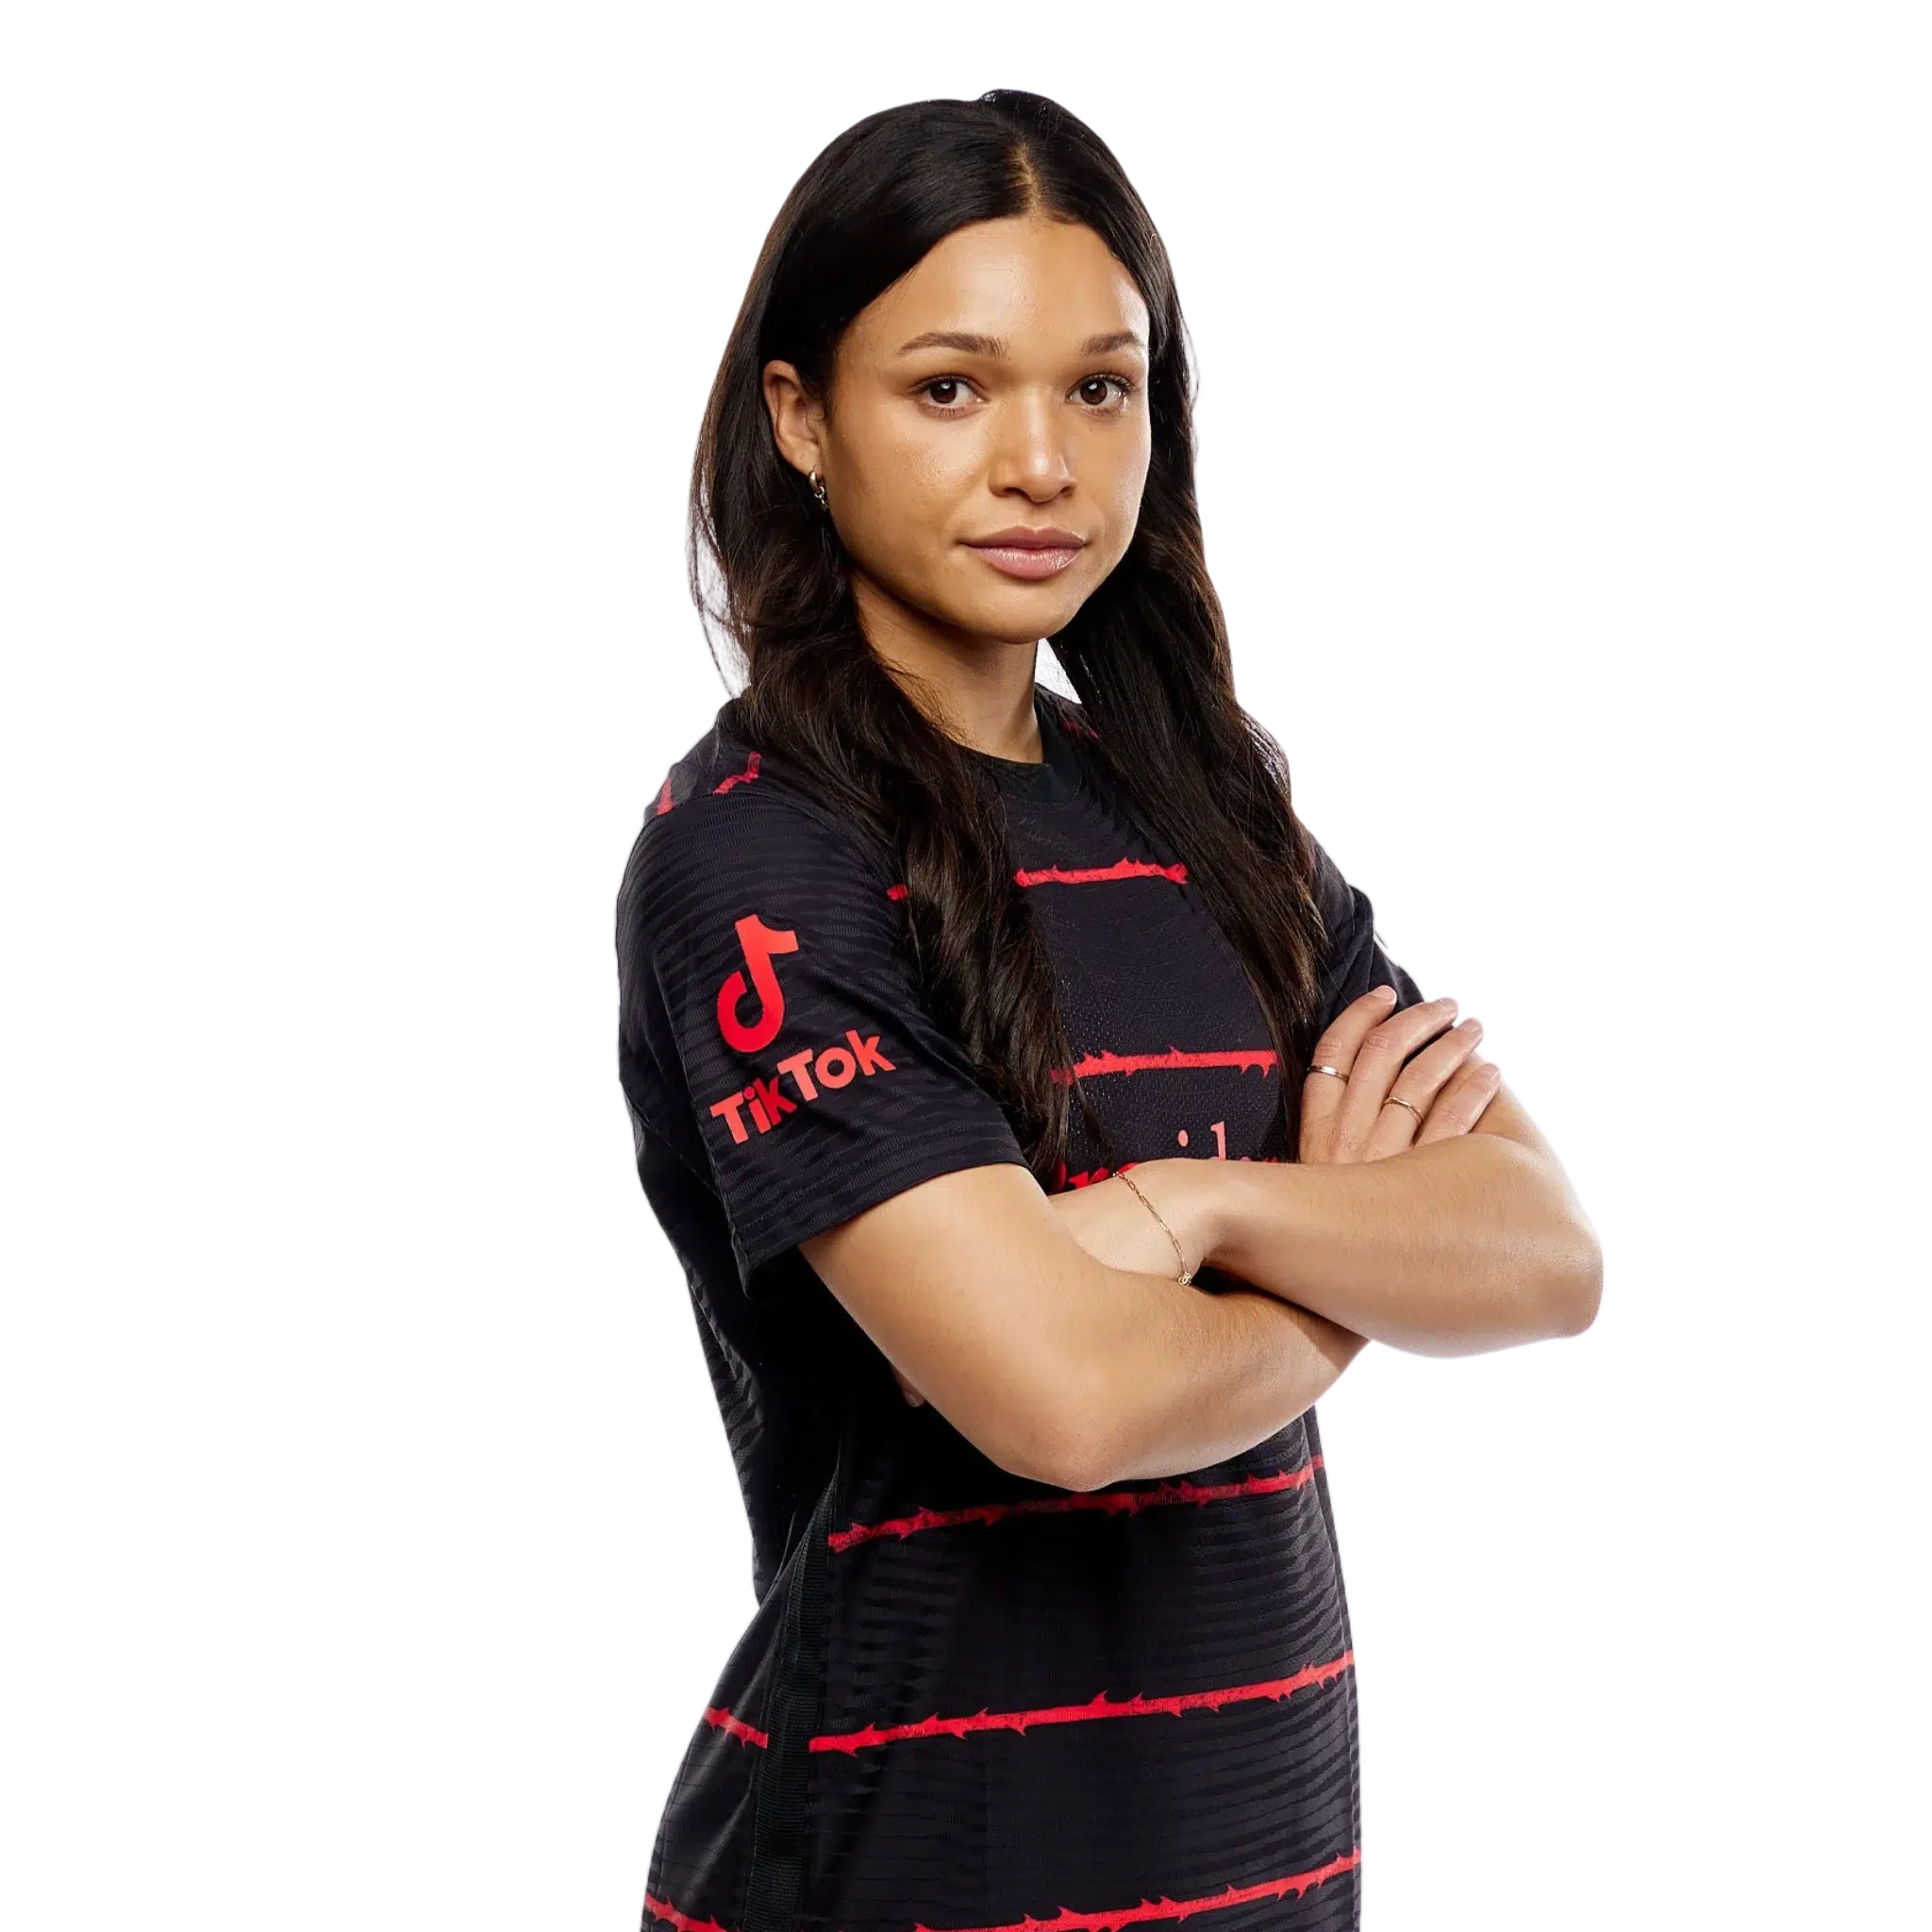 Portland Thorns featured player